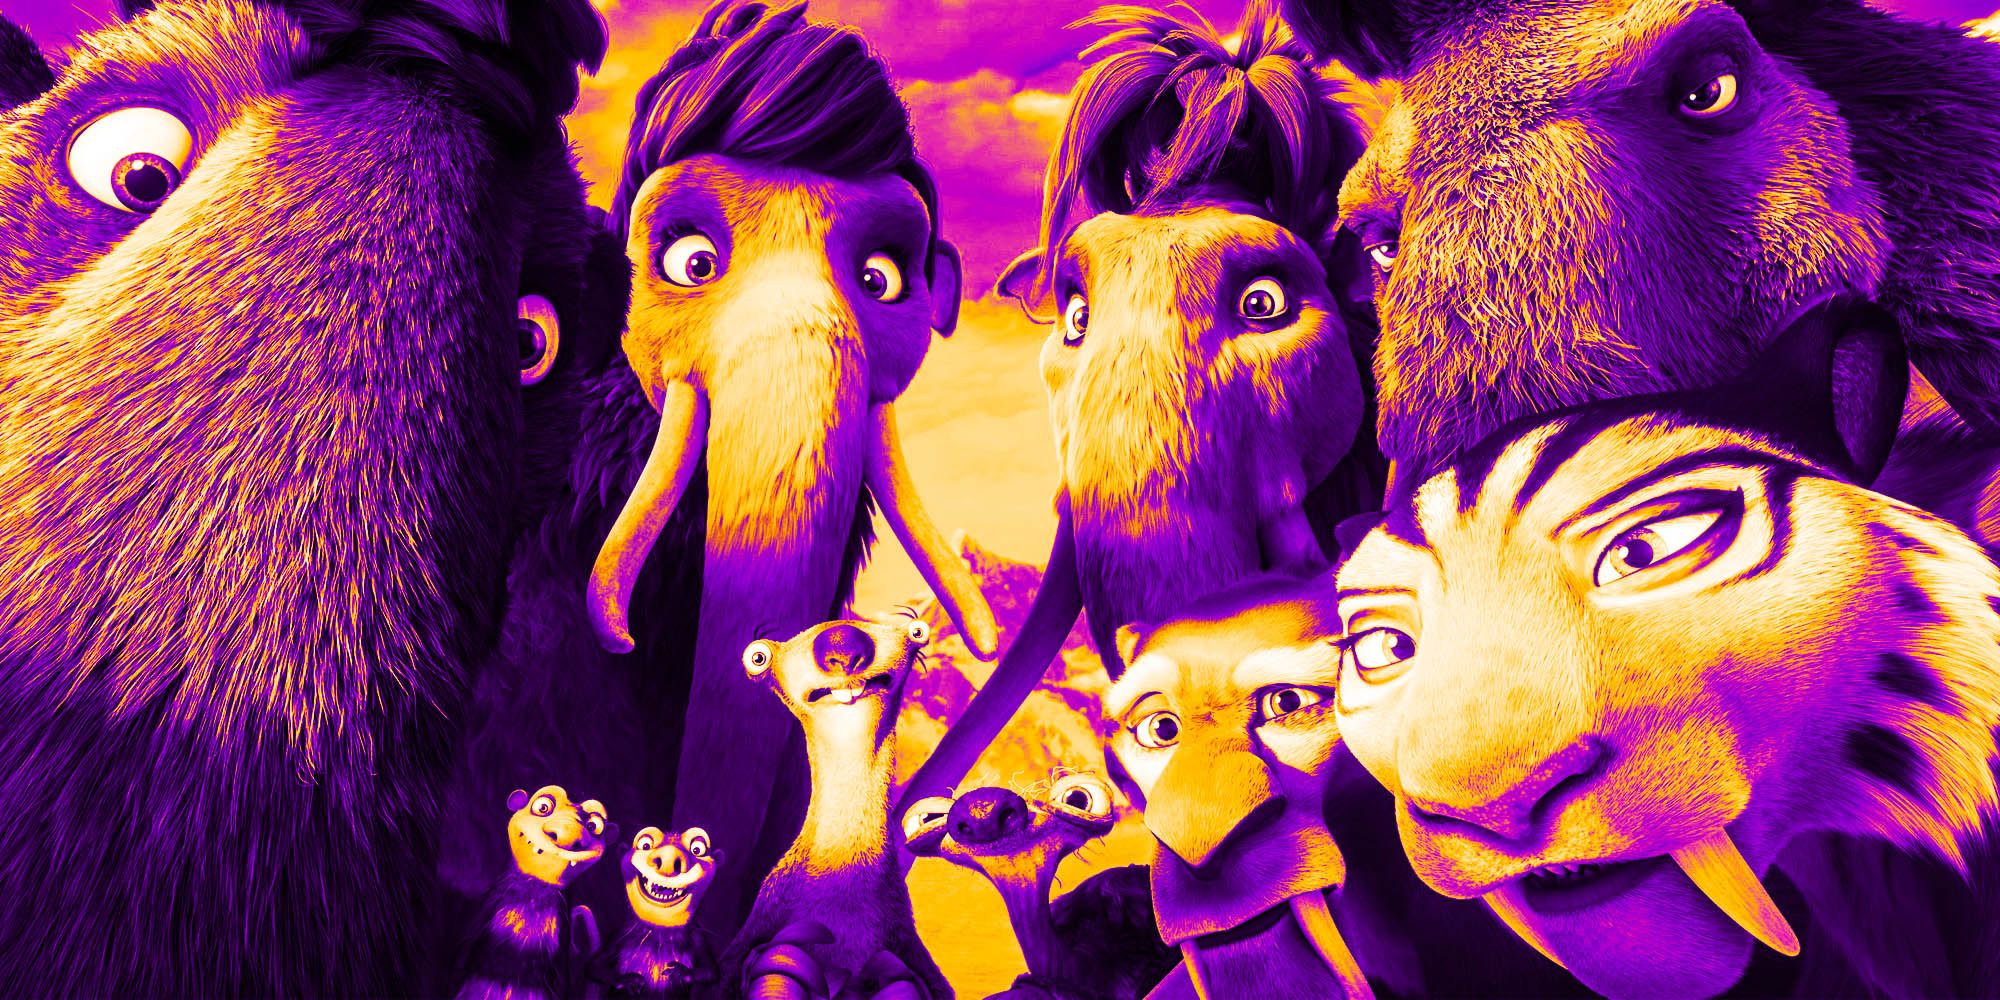 The characters of Ice Age look at the camera in surprise with a purple filter